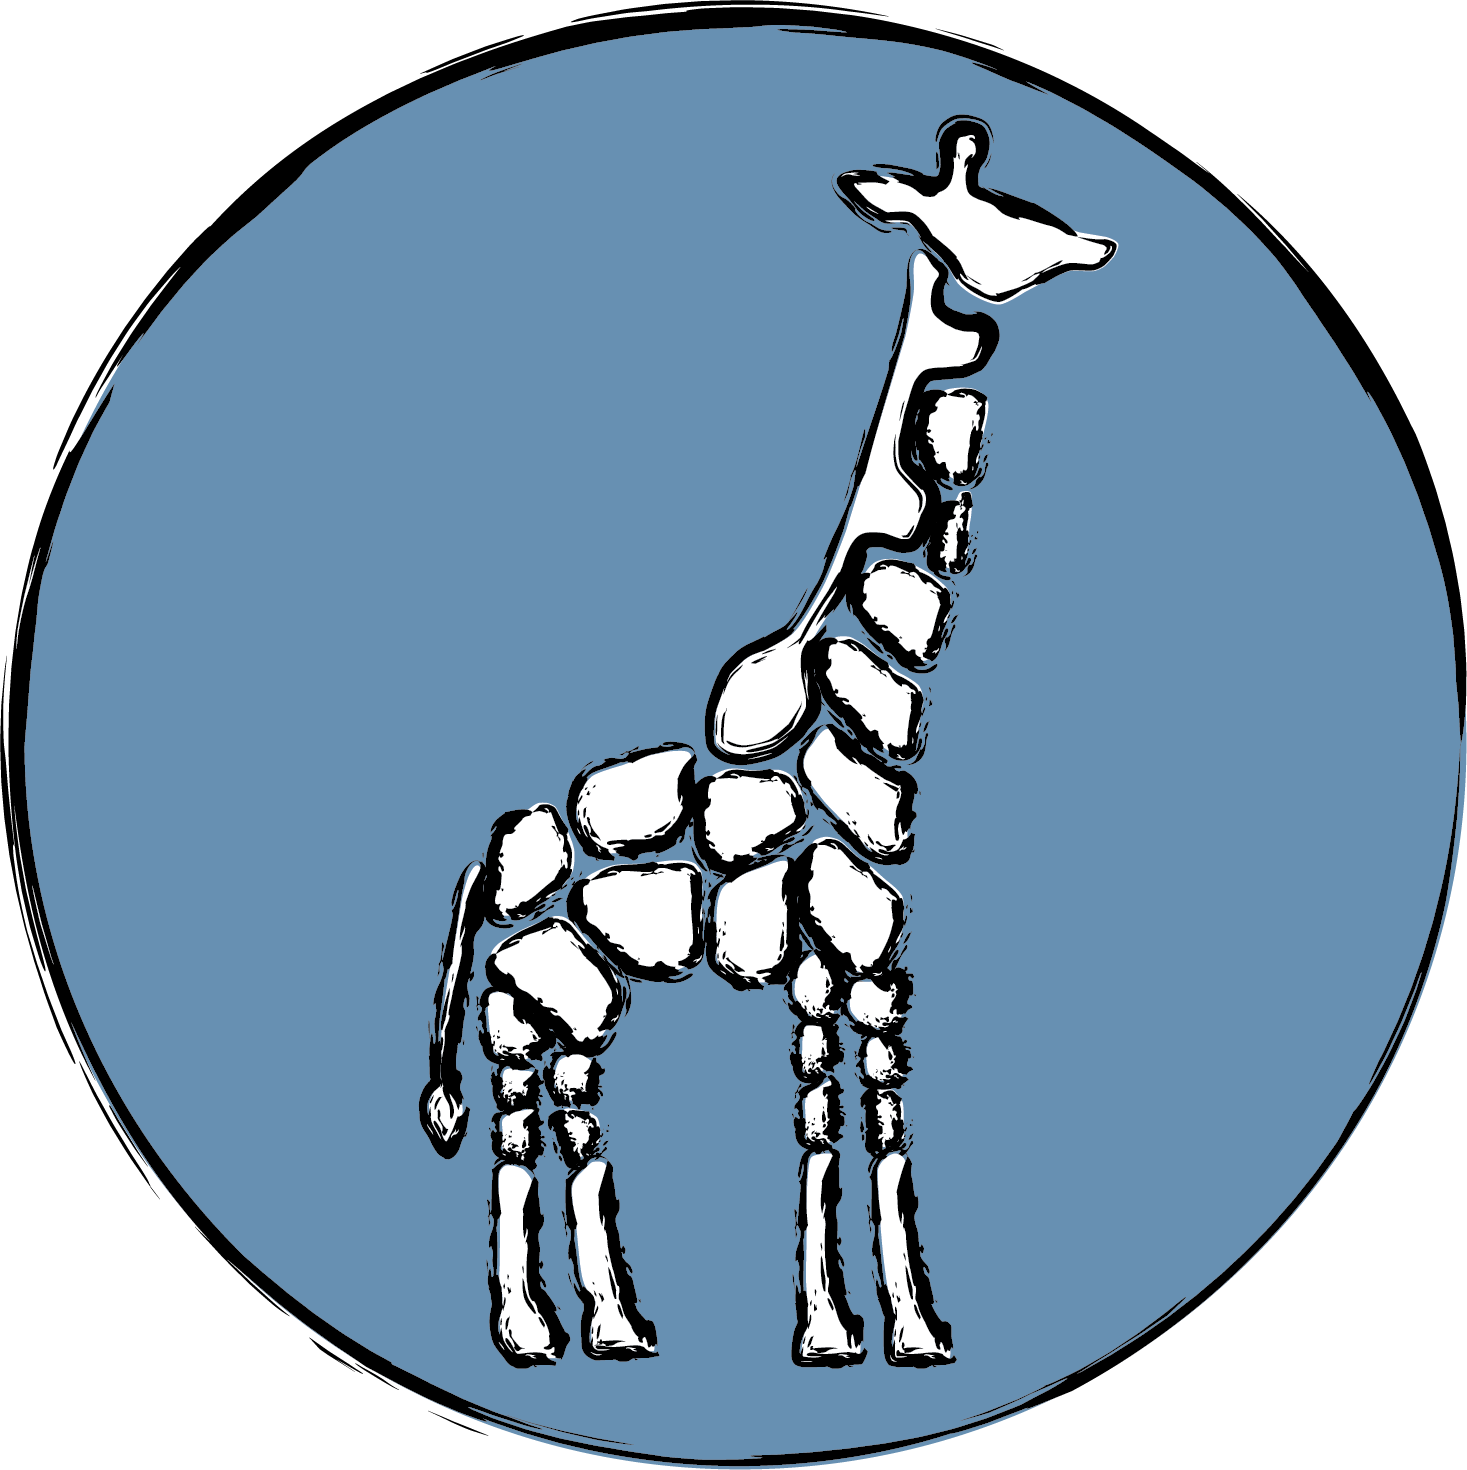 Tiny Giraffe Pictures profile on Qualified.One